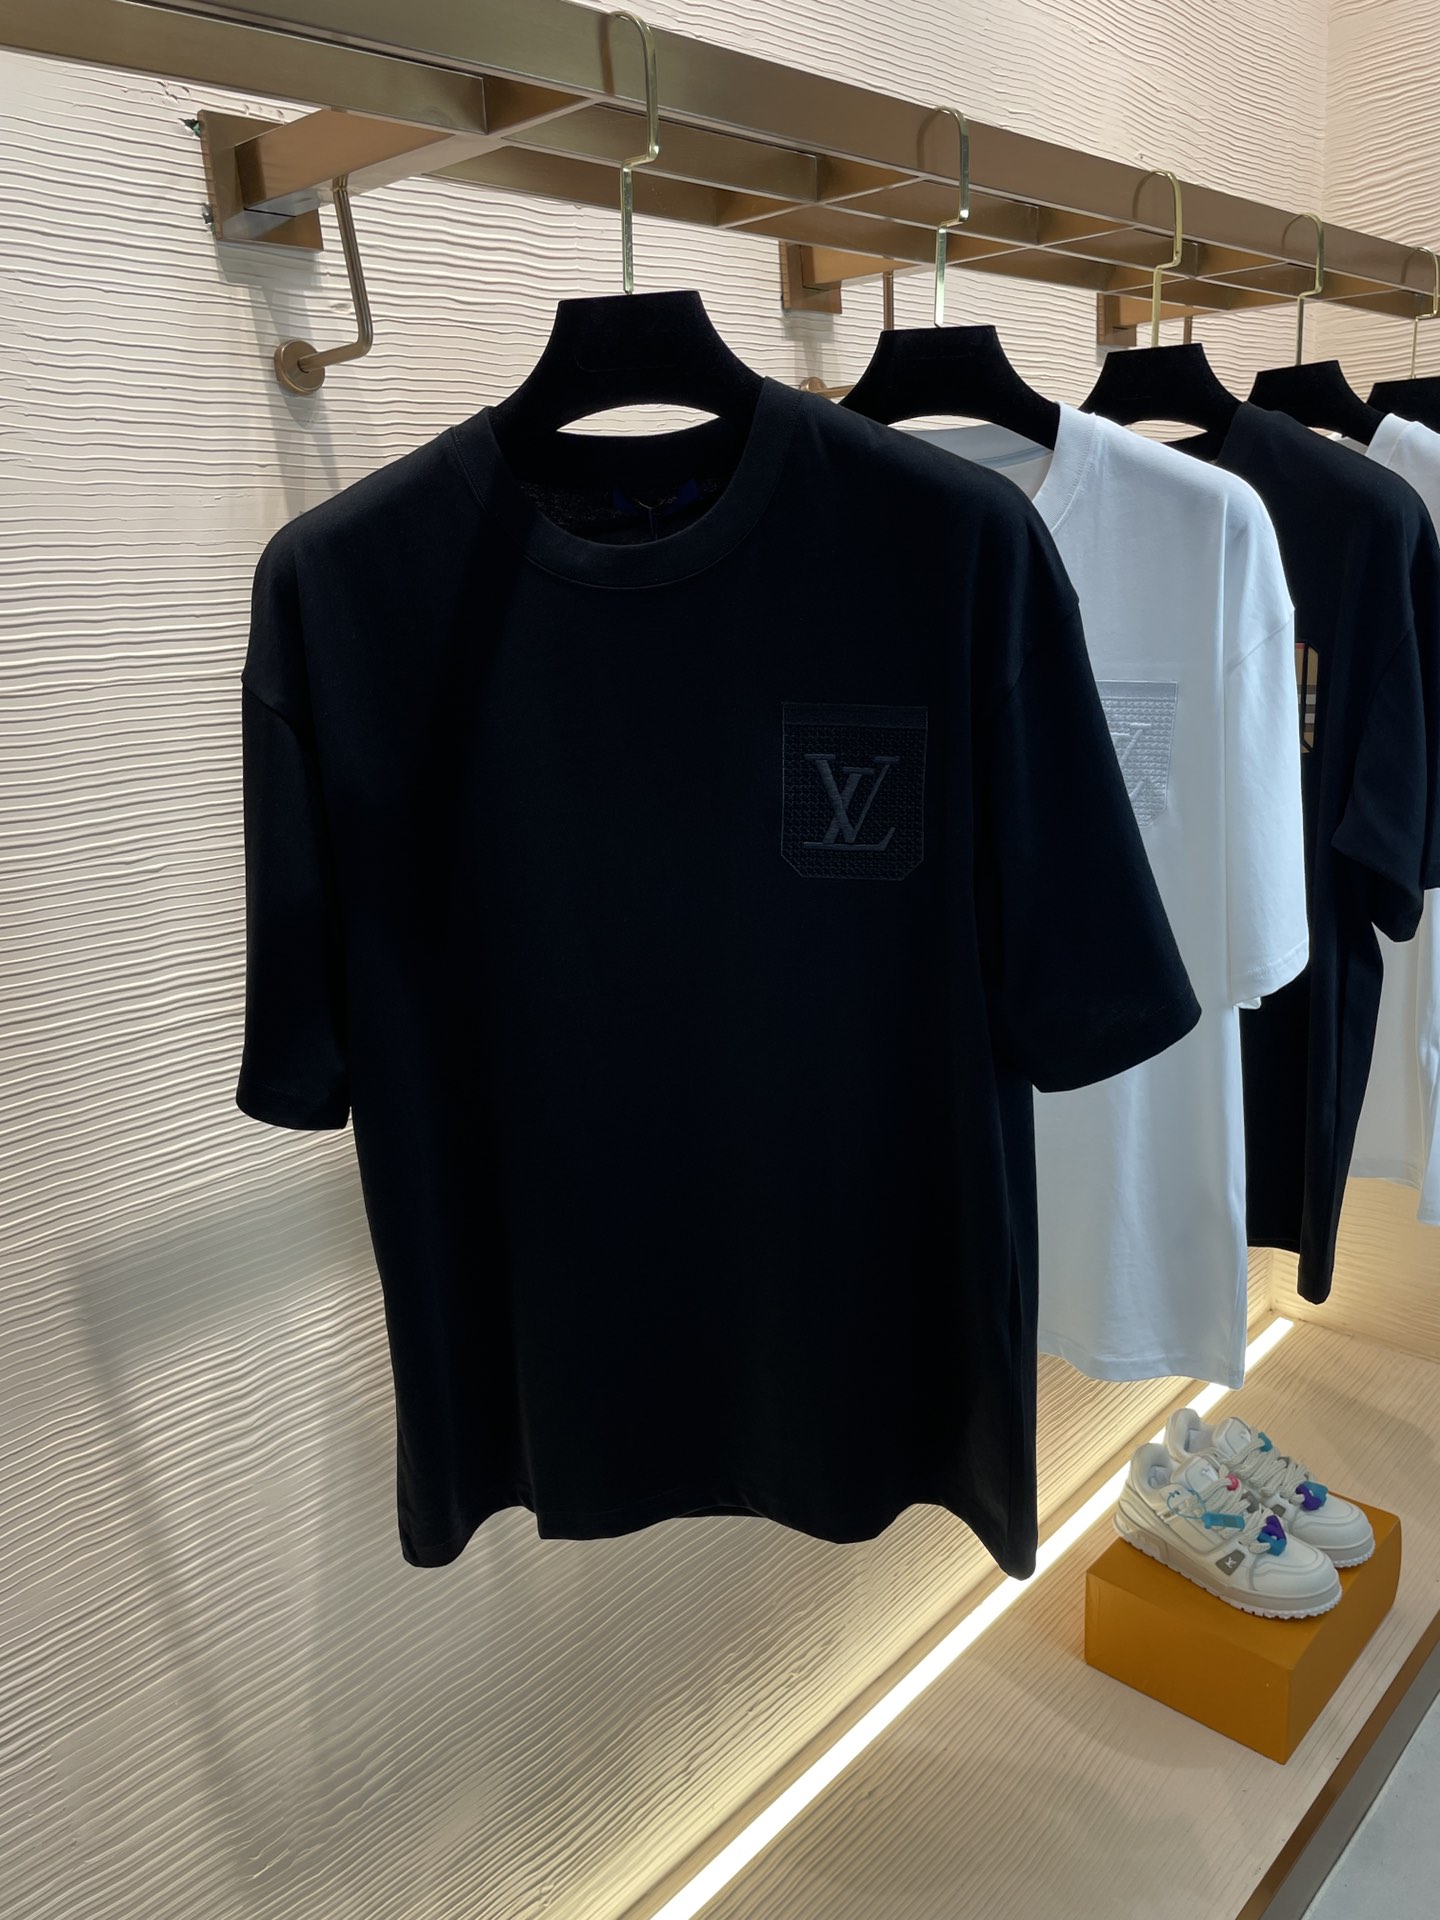 The highest quality fake
 Louis Vuitton Clothing T-Shirt Black White Embroidery Cotton Summer Collection Short Sleeve